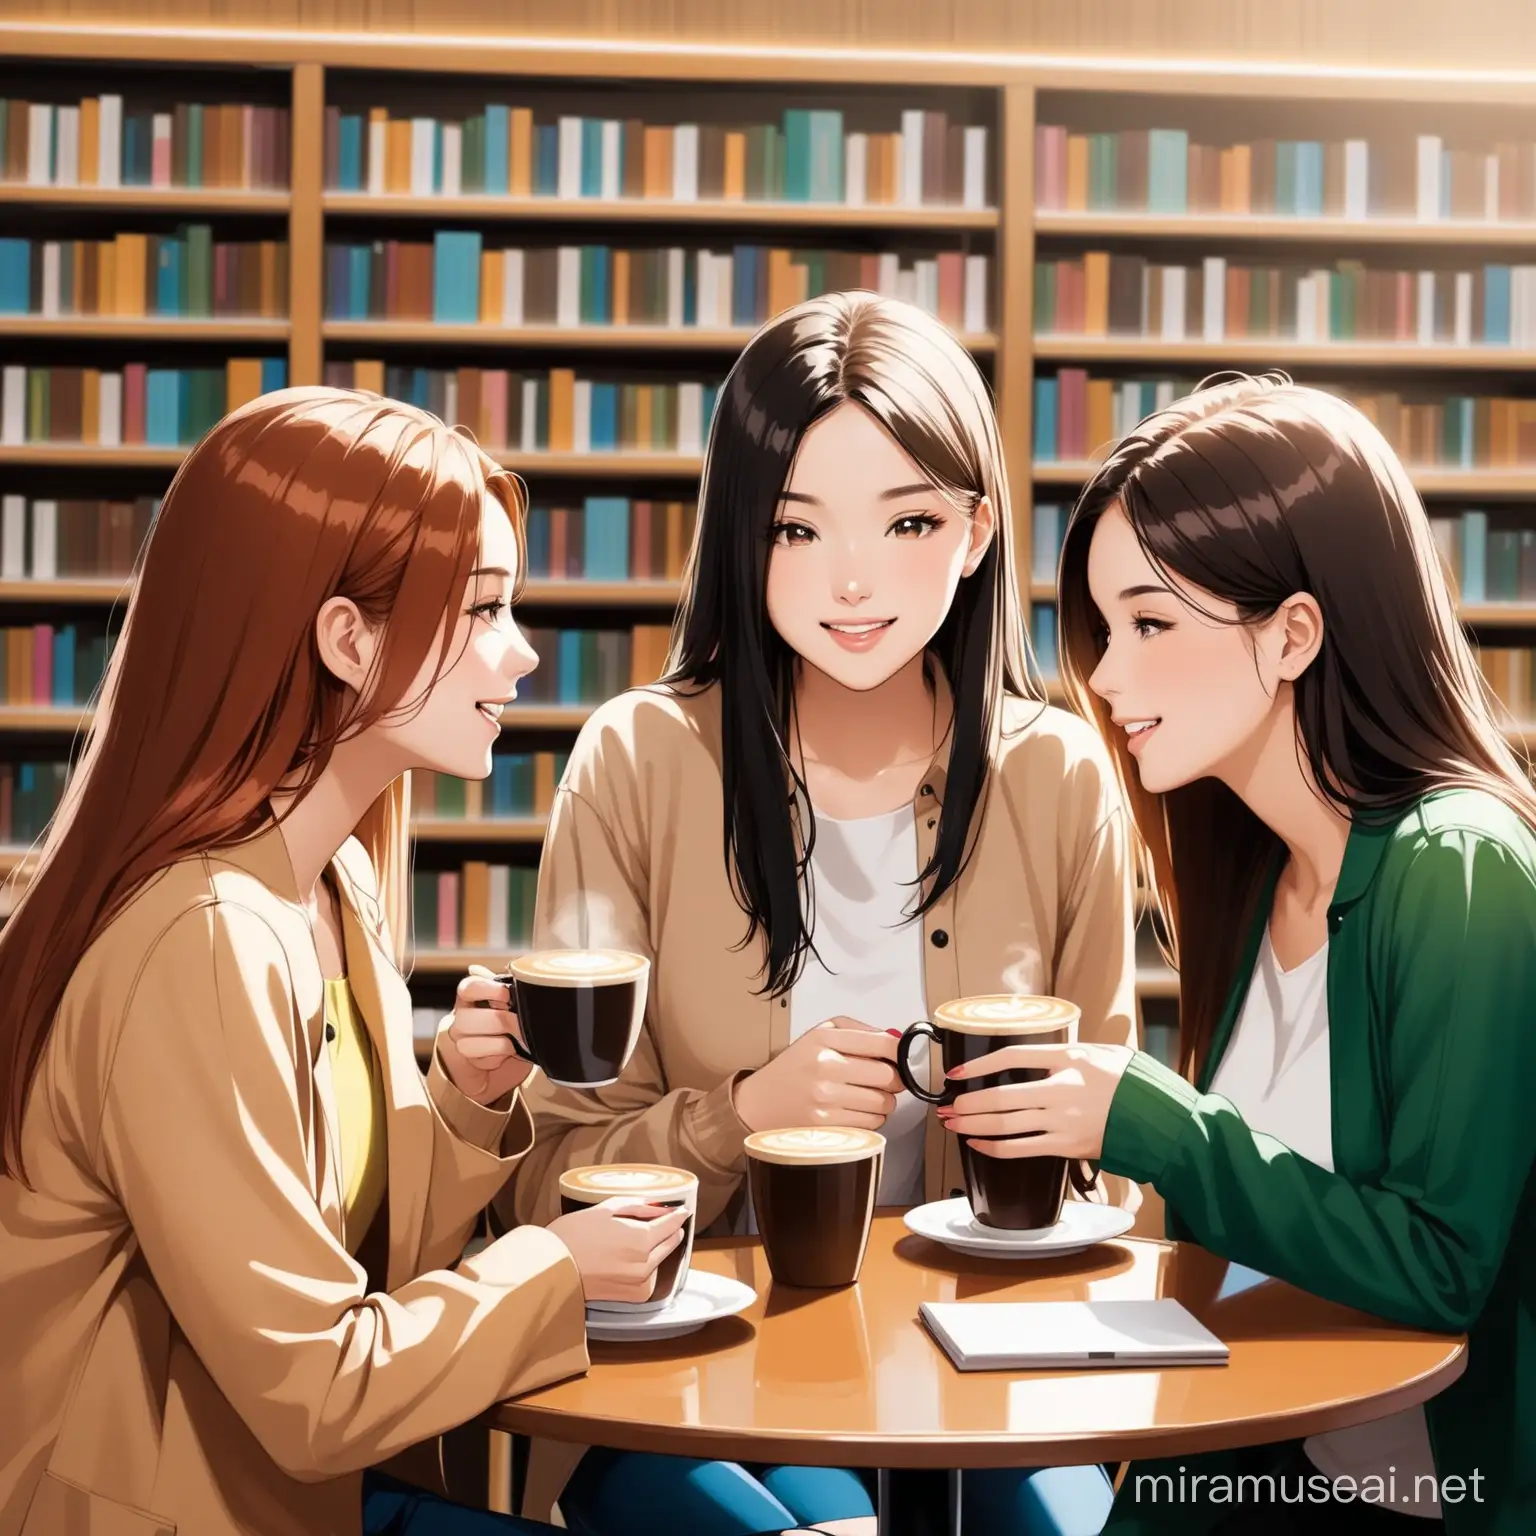 a group of 3 female friends having coffee in a library